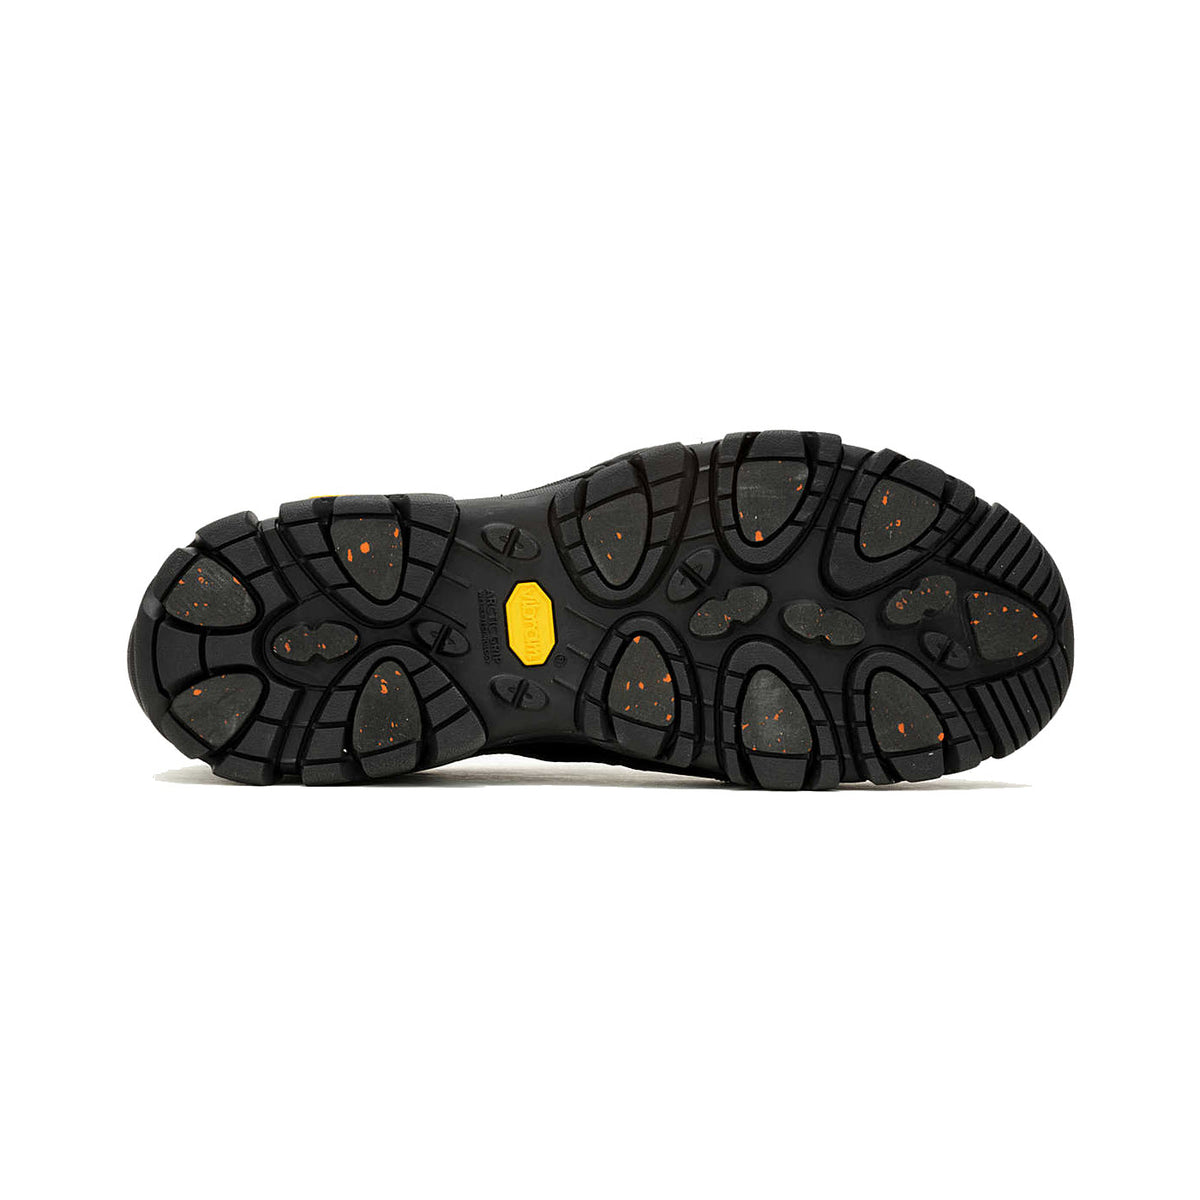 Bottom view of a Merrell hiking boot sole with intricate multi-directional tread pattern and Vibram Arctic Grip, featuring a visible yellow brand logo.